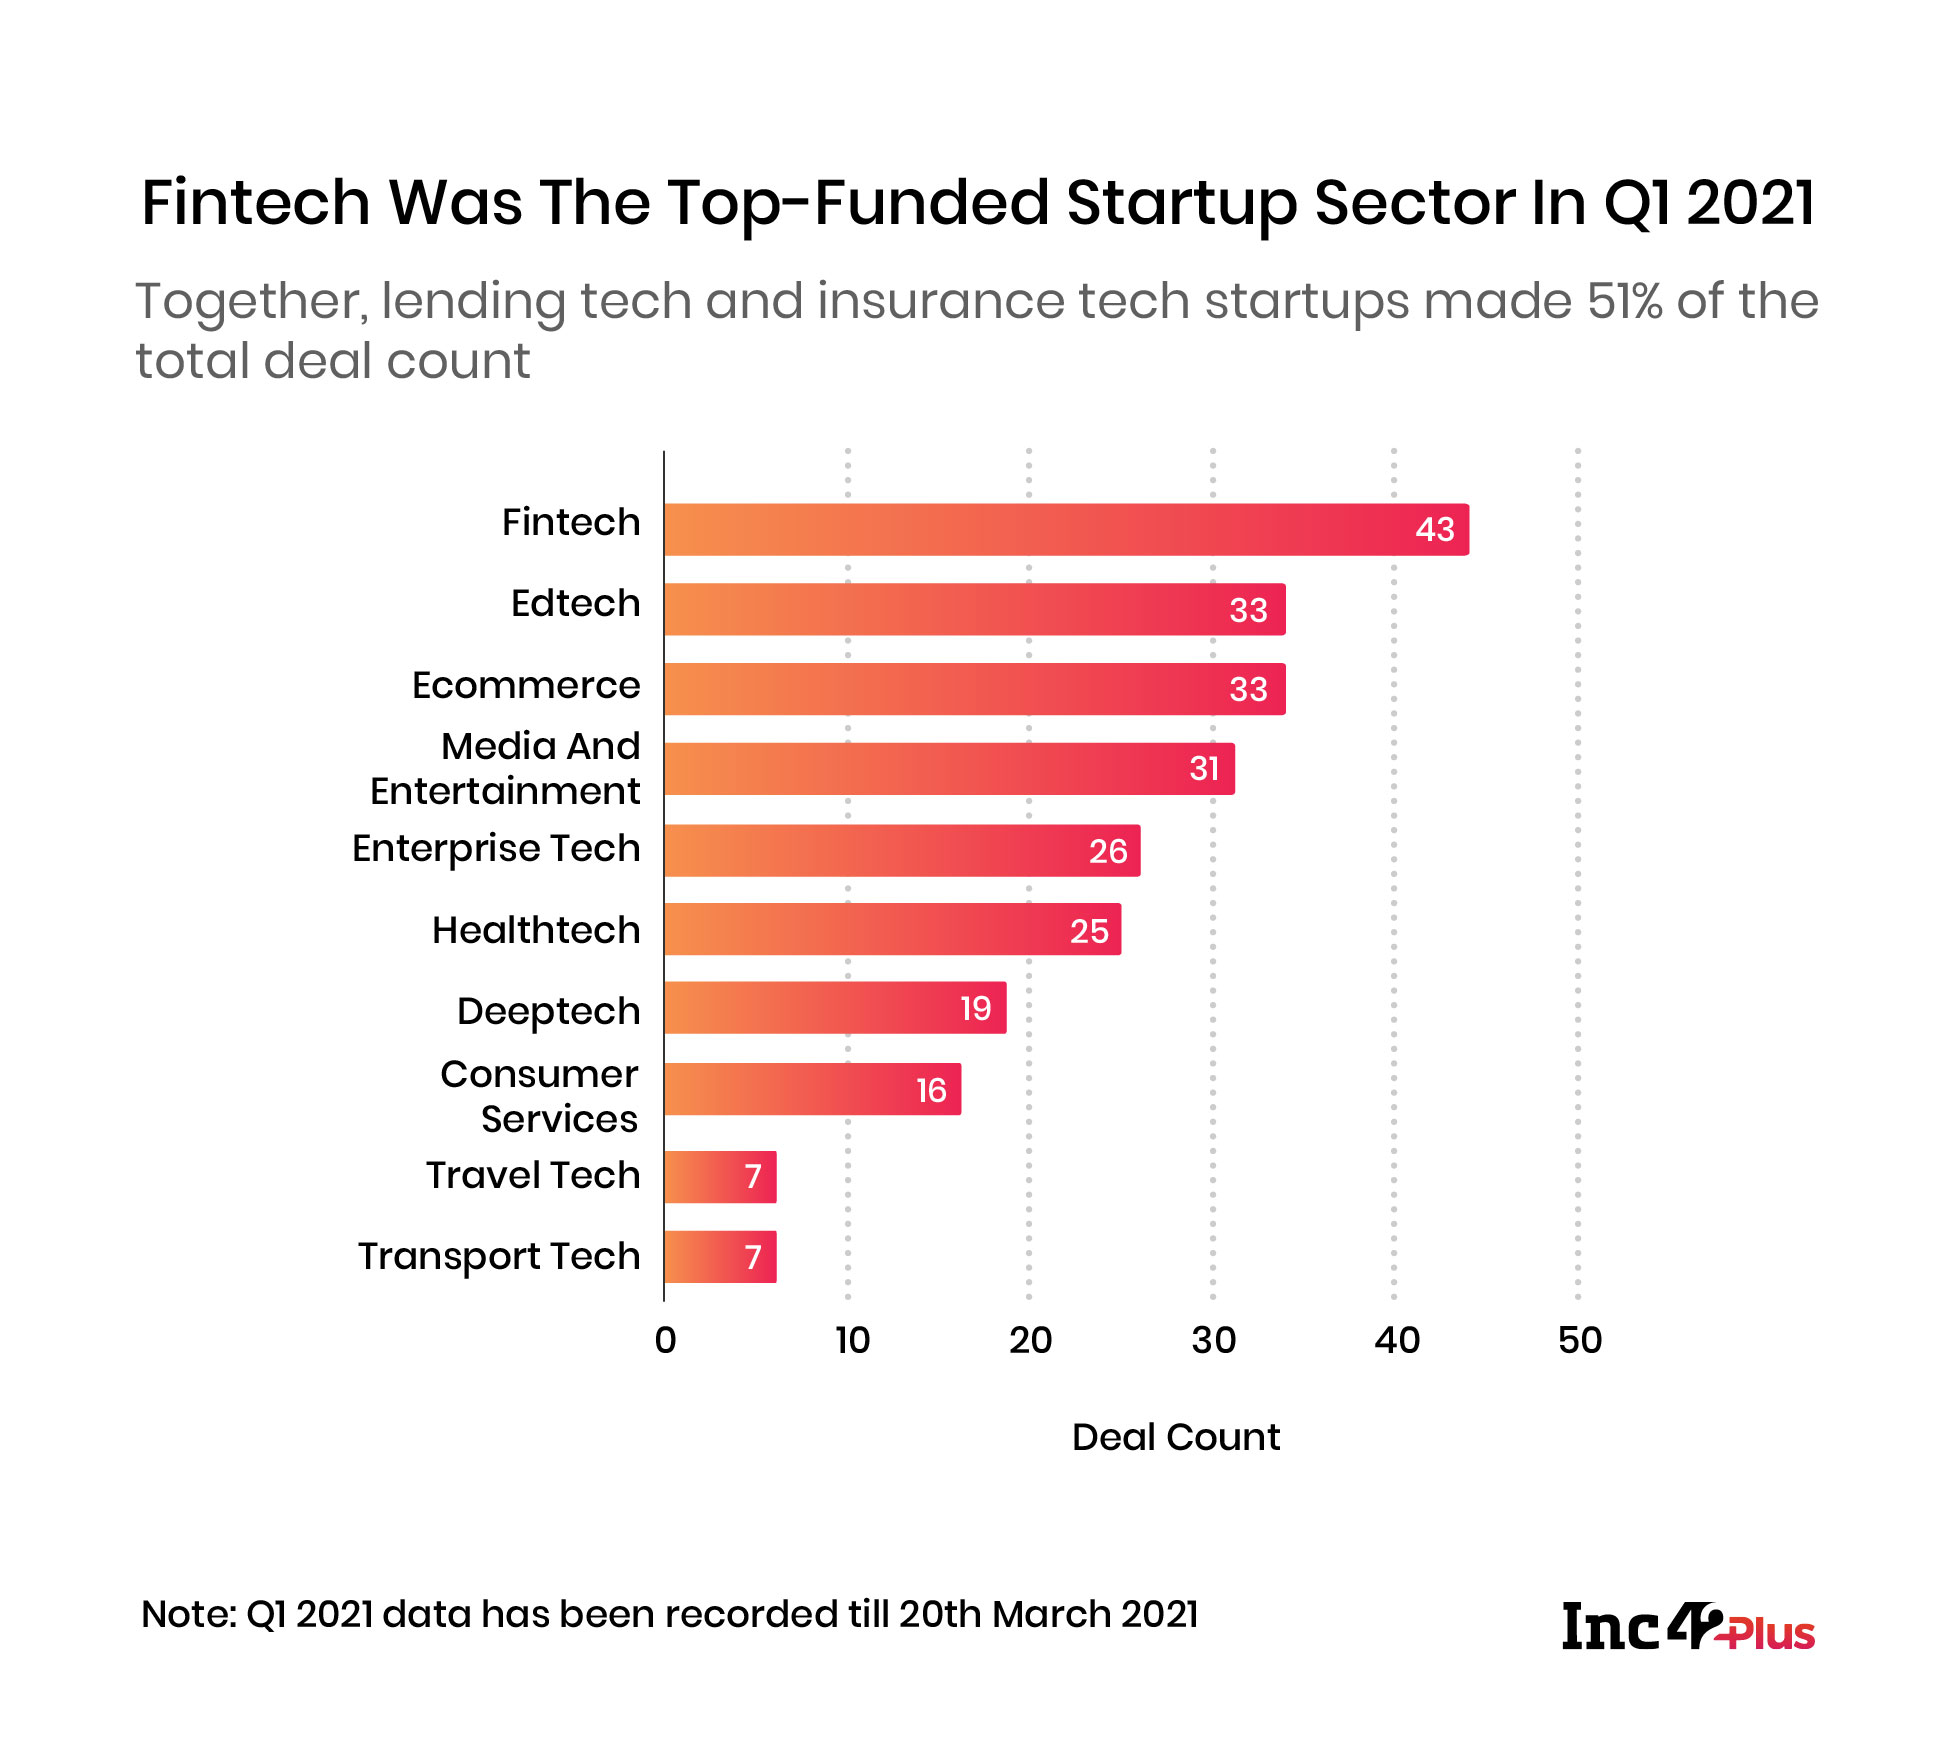 Fintech Was The Top-Funded Startup Sector In Q1 2021